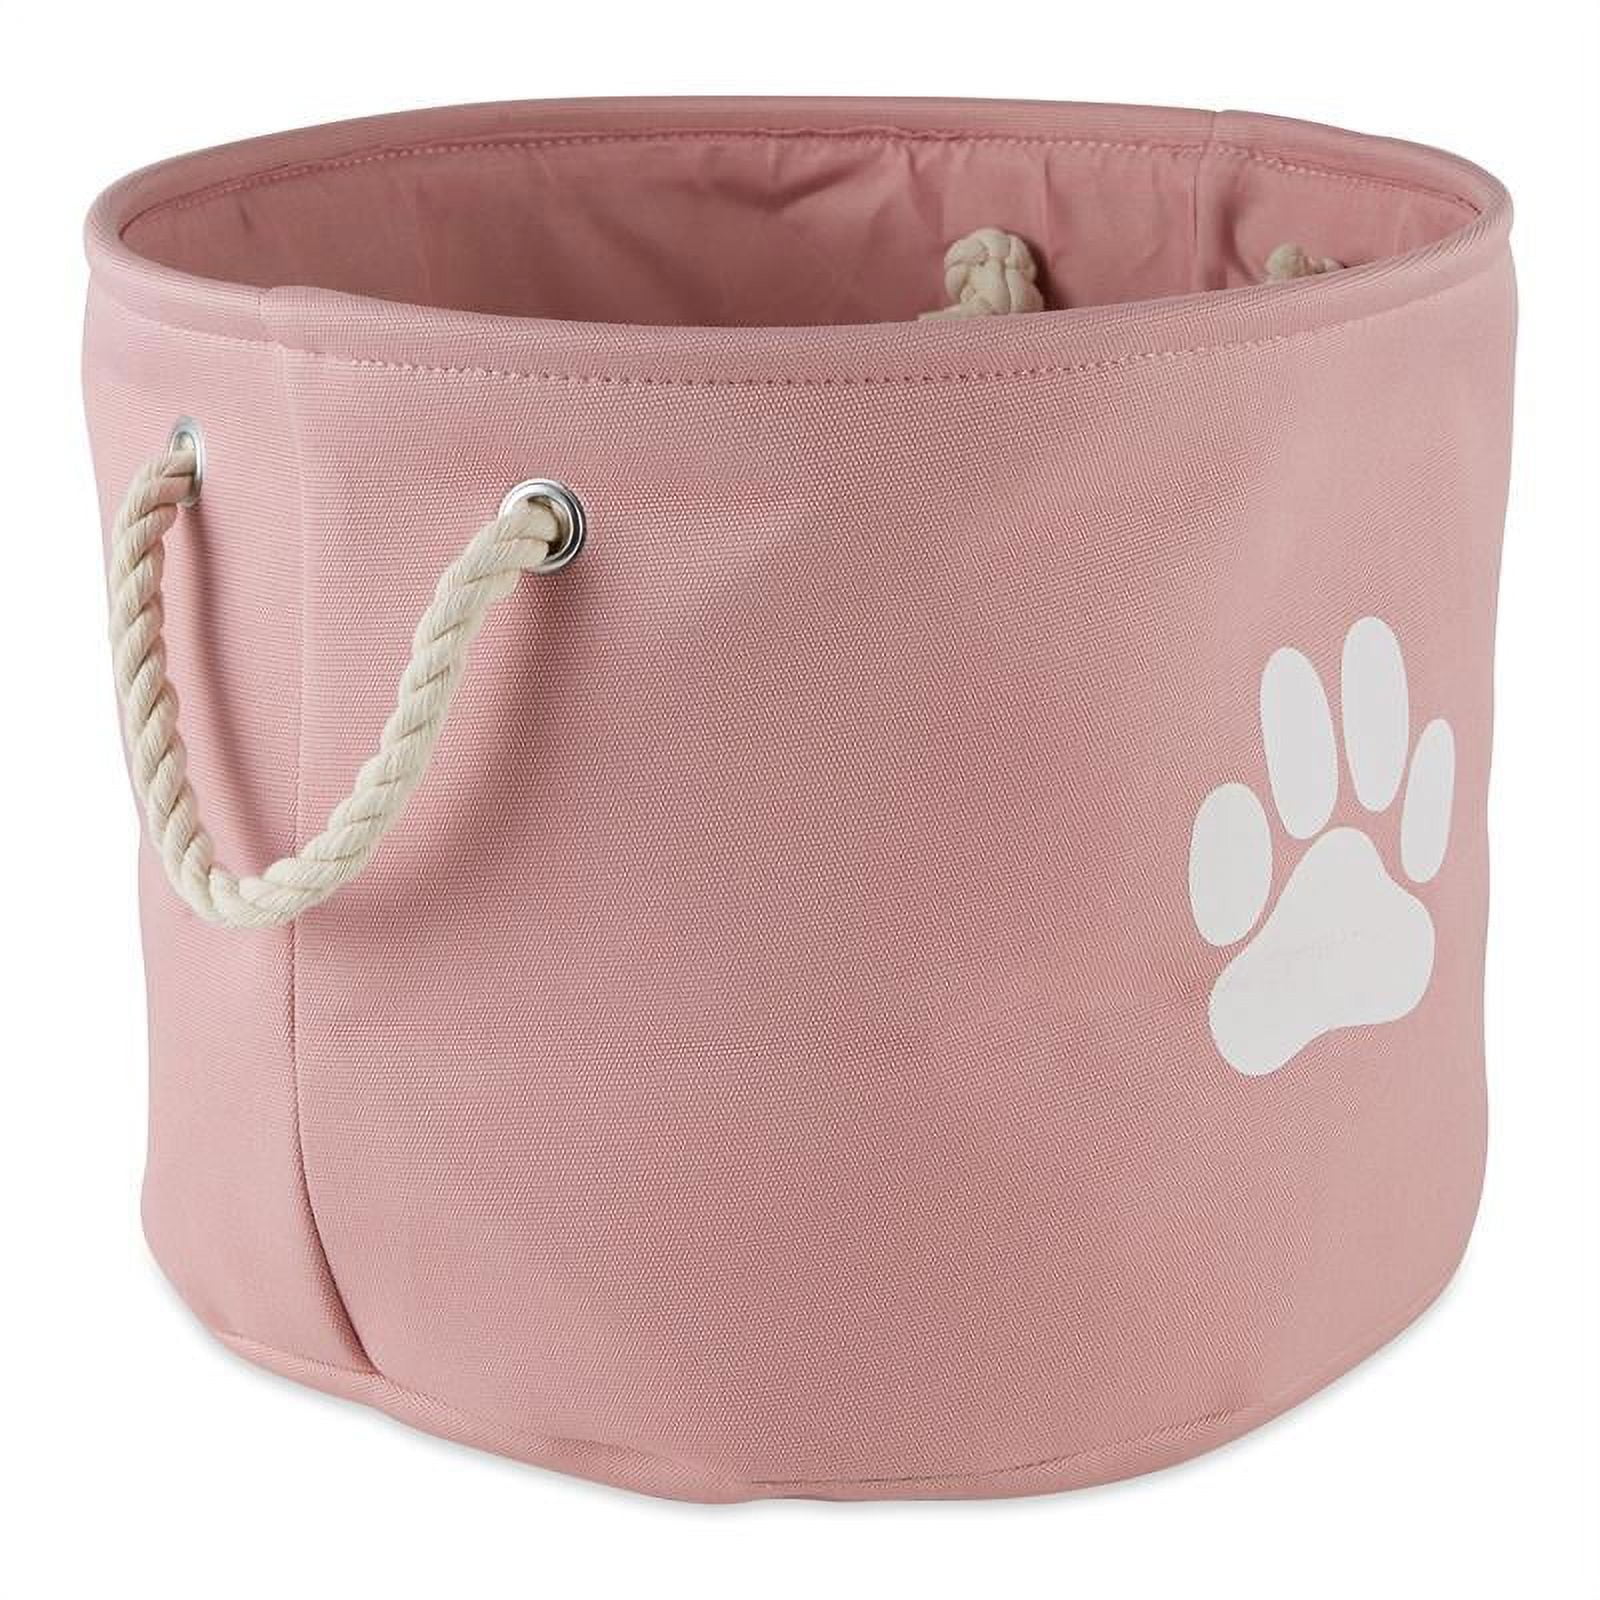 Picture of Design Imports CAMZ12478 Paw Round Polyester Pet Bin, Rose - Small